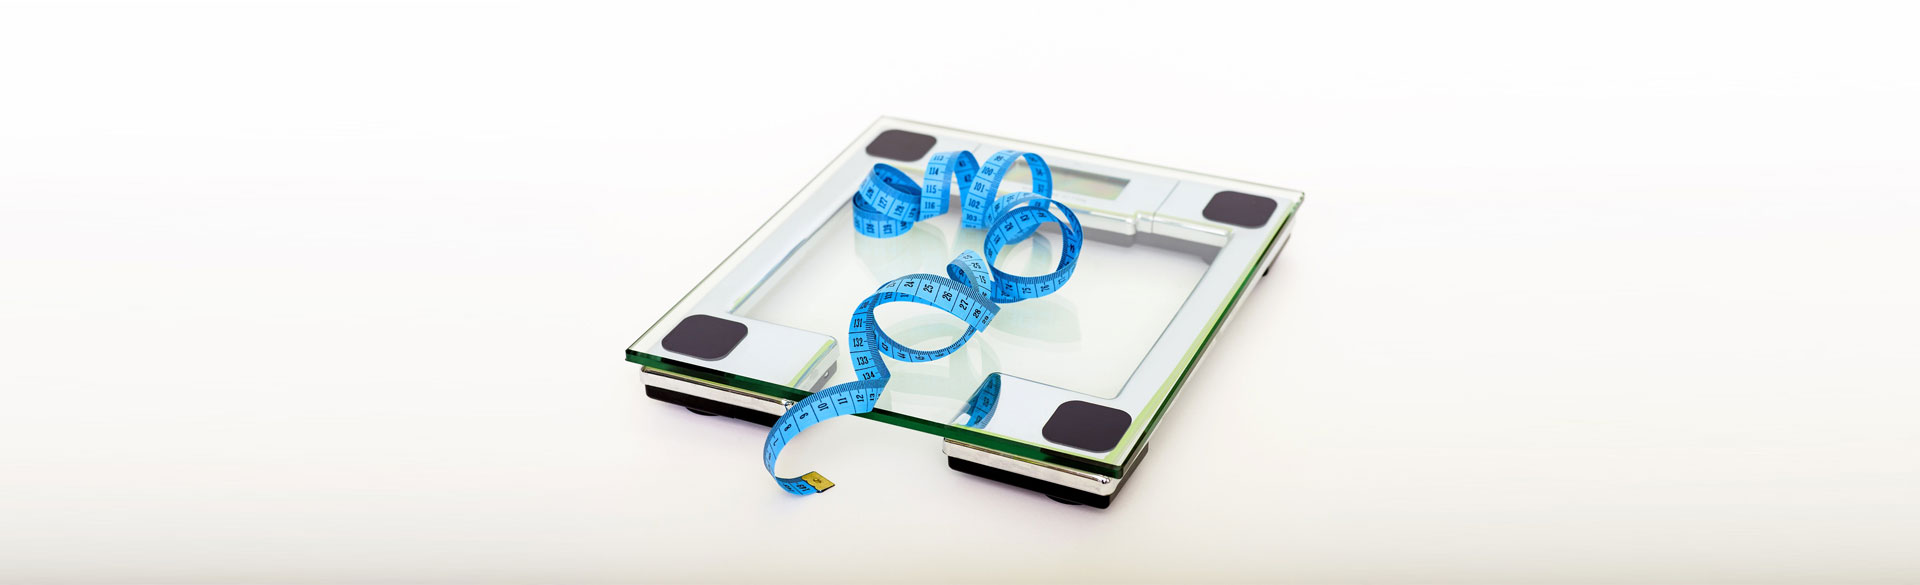 New Year/New You: Reflections on Nutrition and Exercise (Scale and Tape Measure)